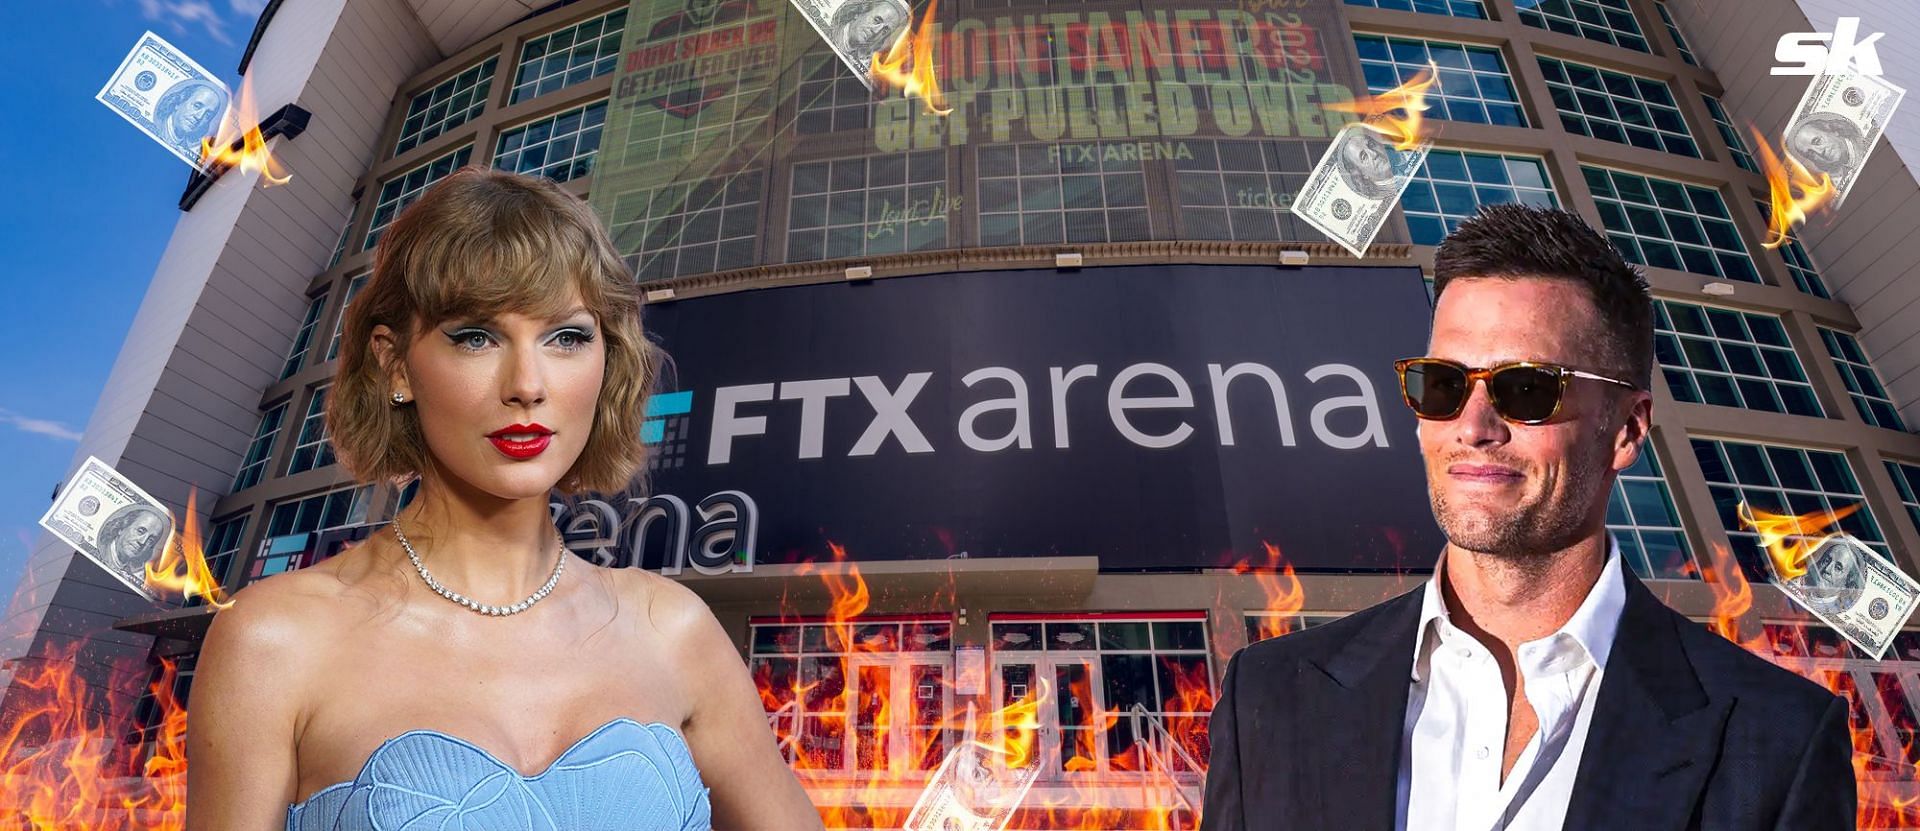 Taylor Swift commended for rejecting $100,000,000 FTX deal, Tom Brady grilled for role in 